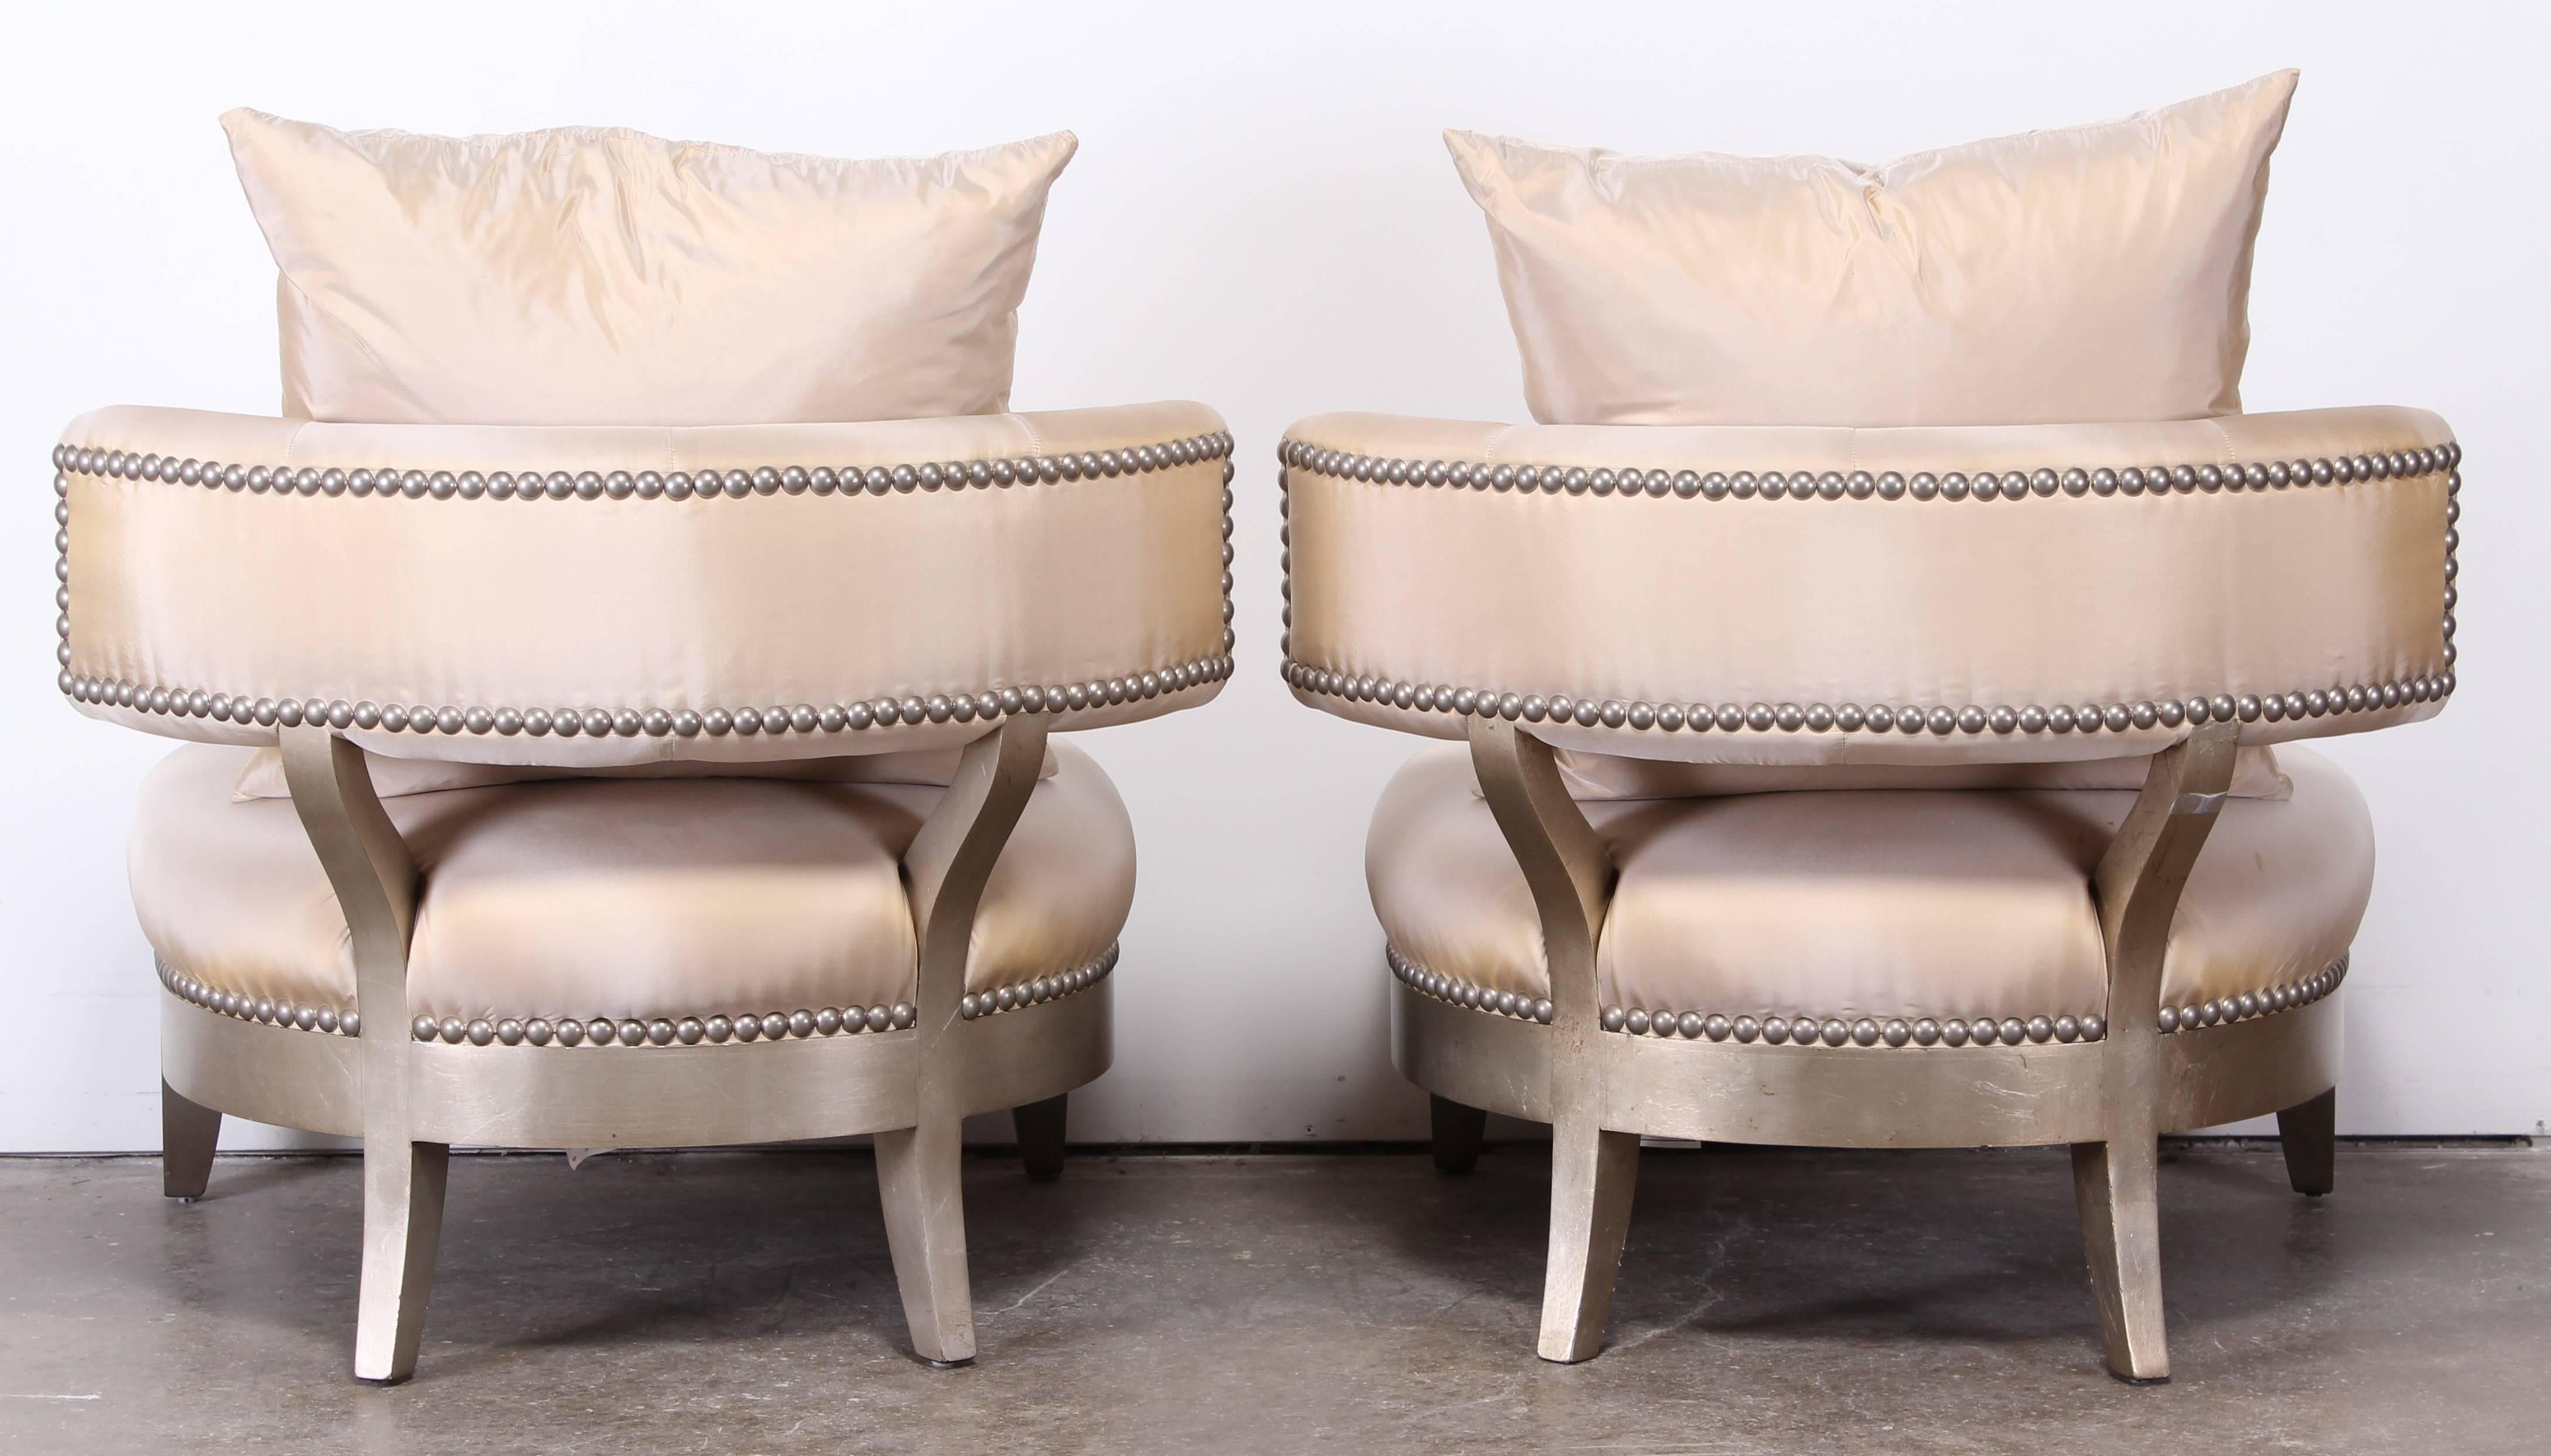 Upholstery Pair of Marge Carson 'Santorini' Chairs, 2000